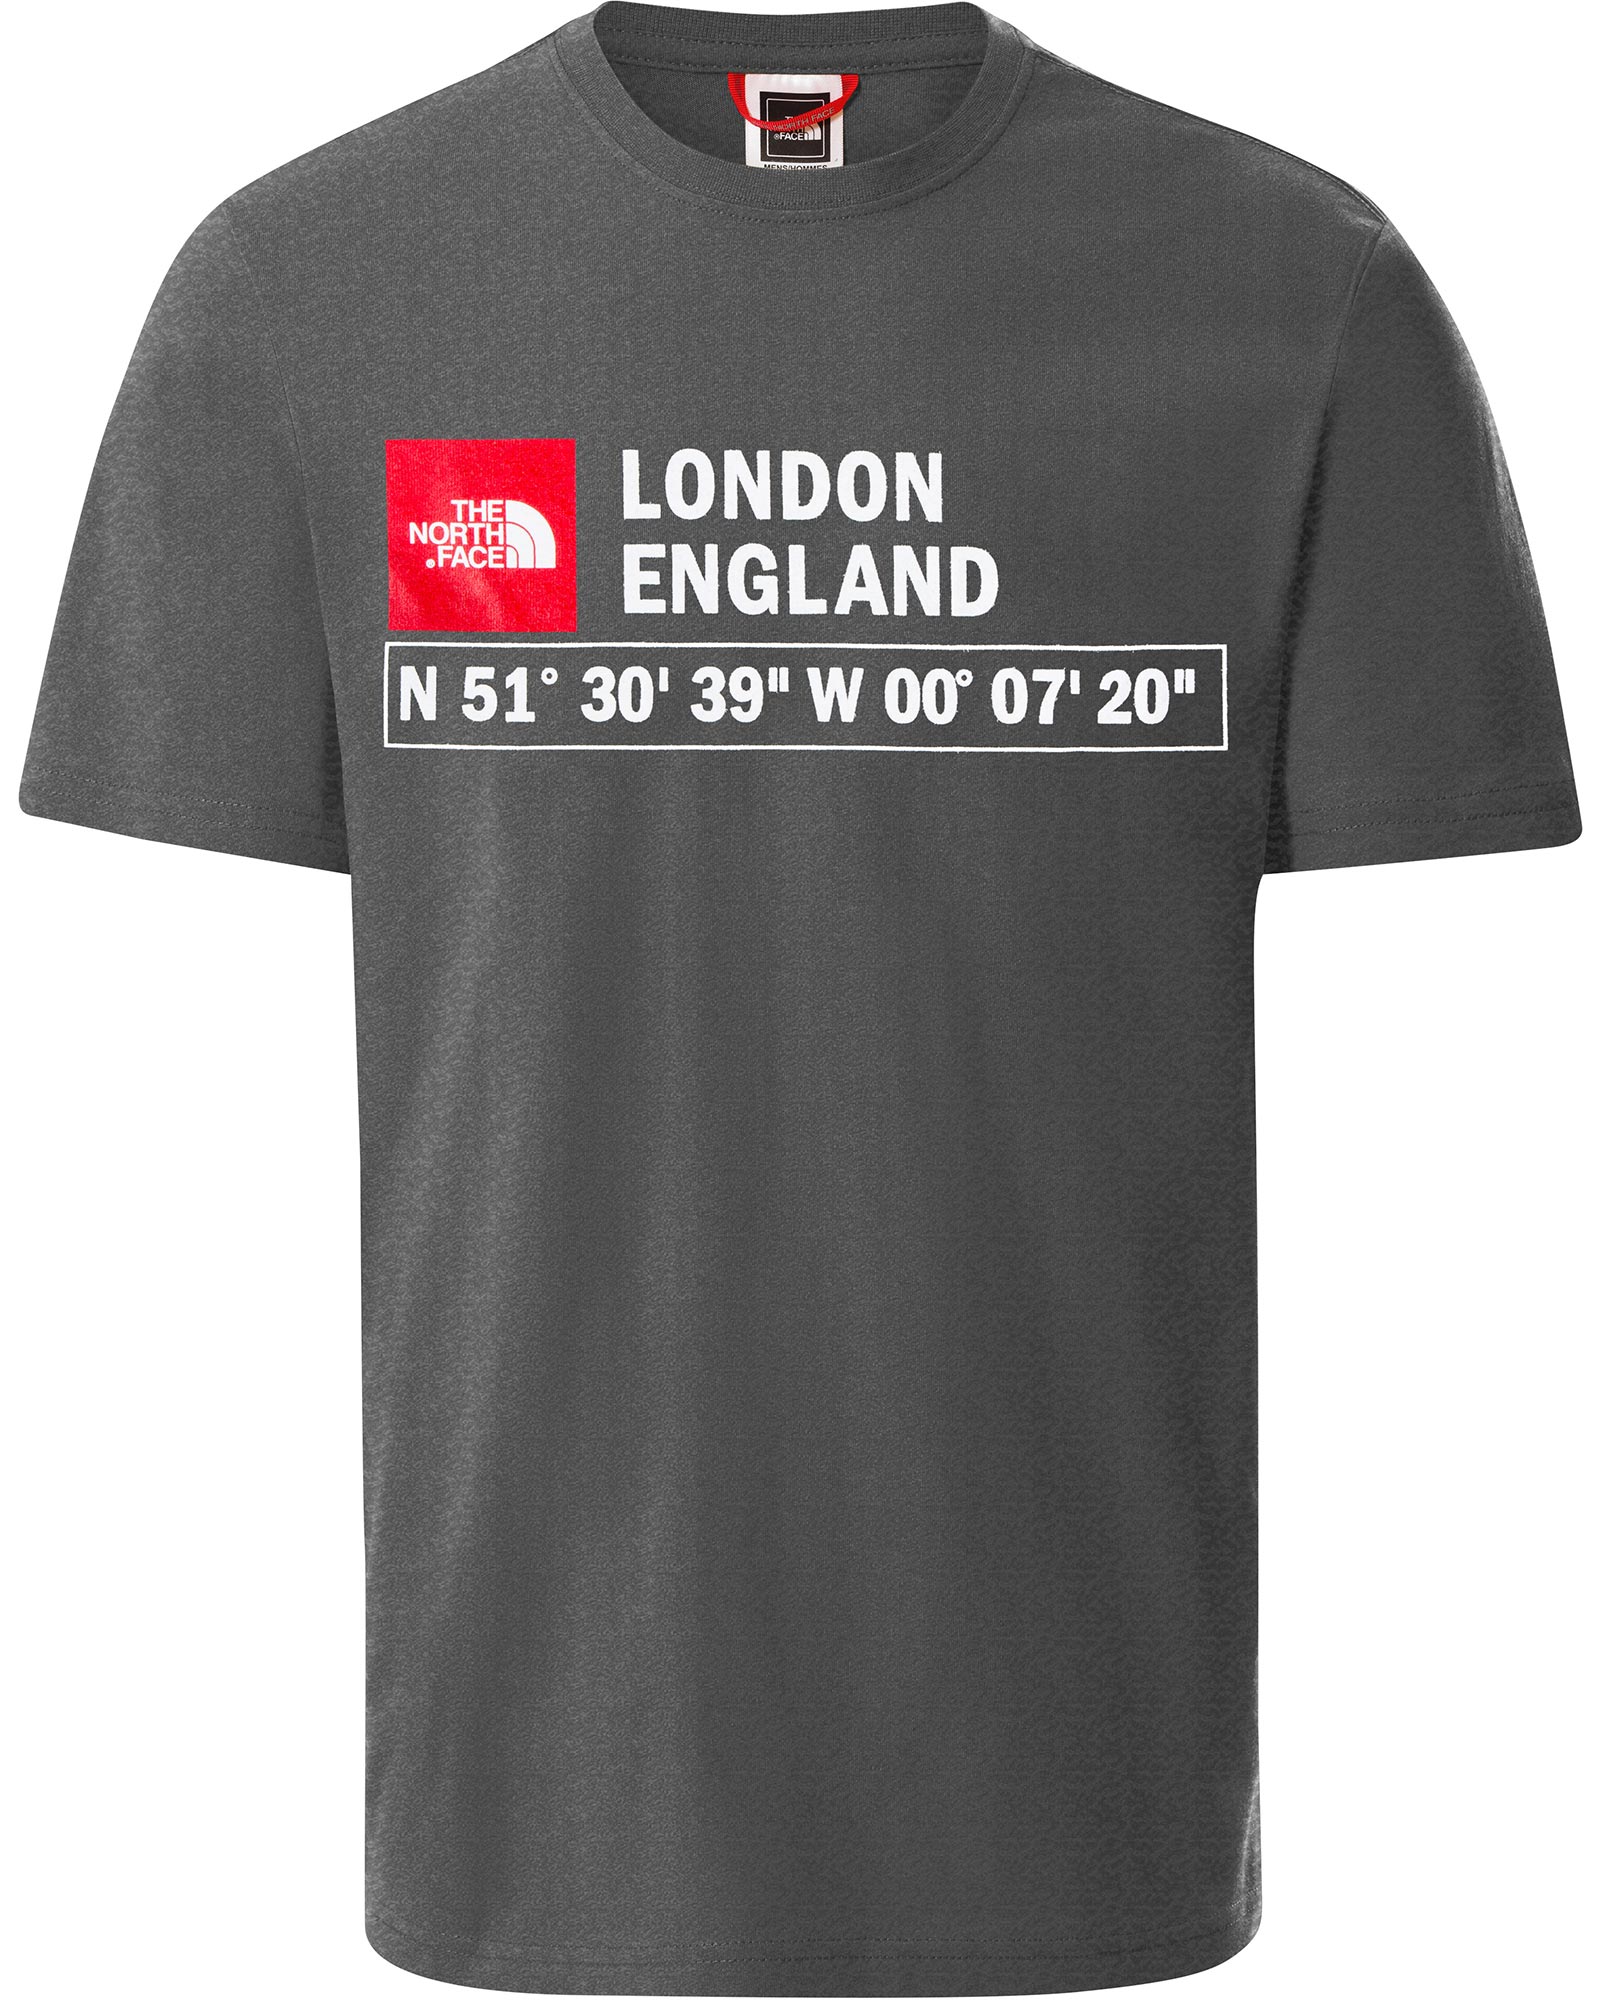 Product image of The North Face London GPS Logo Men's T-Shirt